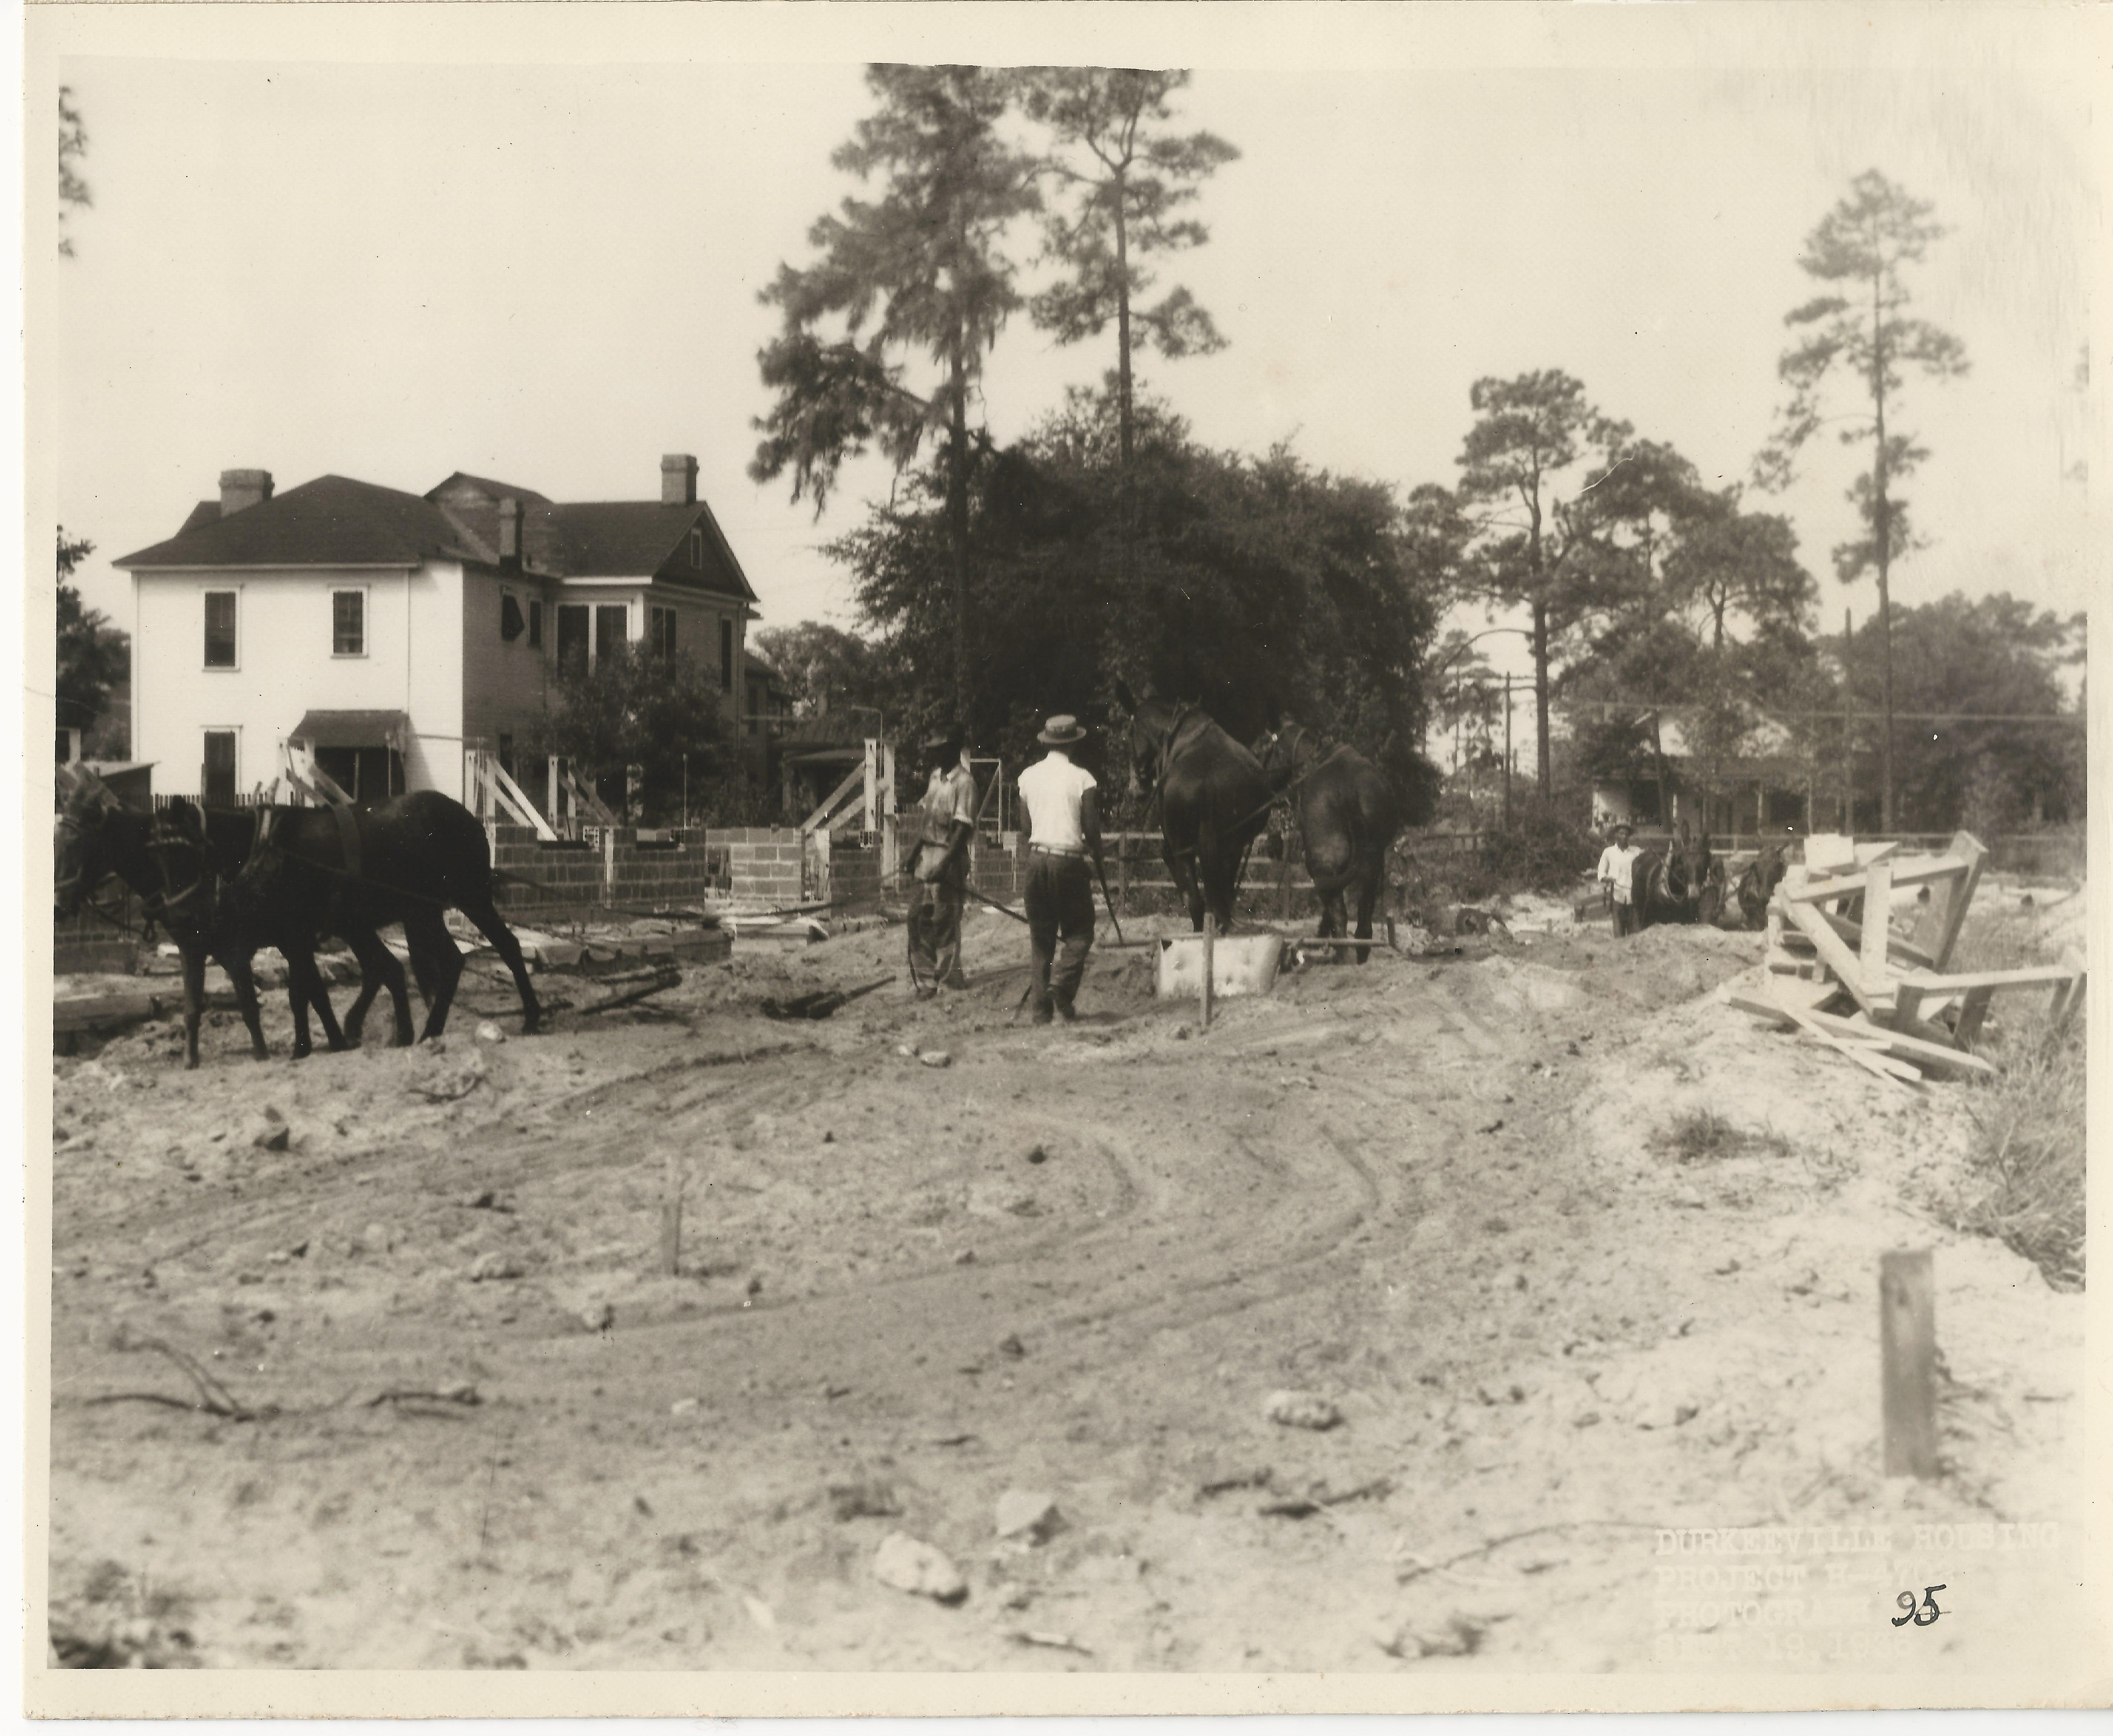 Workers during the construction of the Durkeeville Housing Project